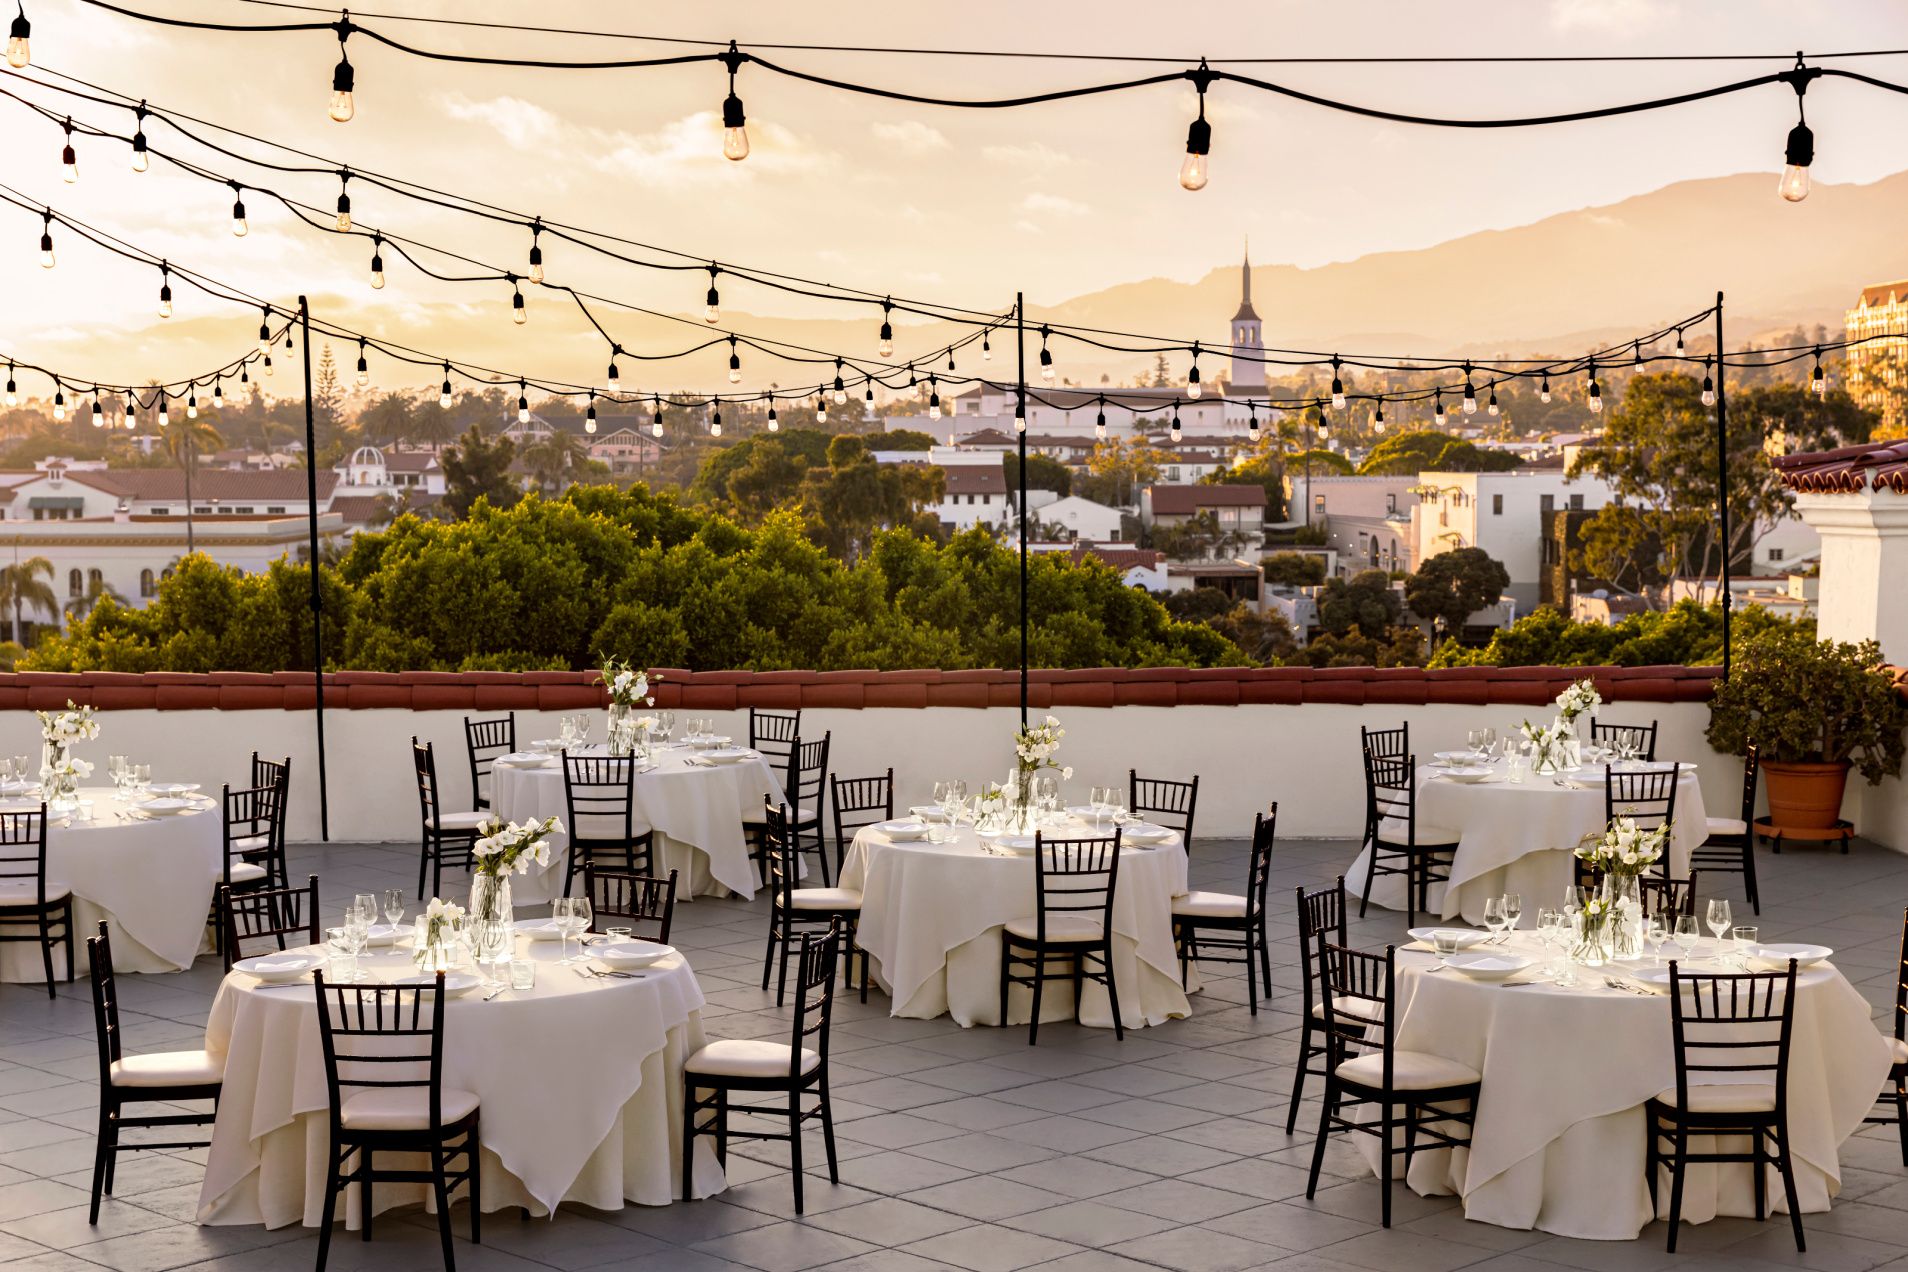 Roofttop deck overlooking santa barbara with formally set banquet tables